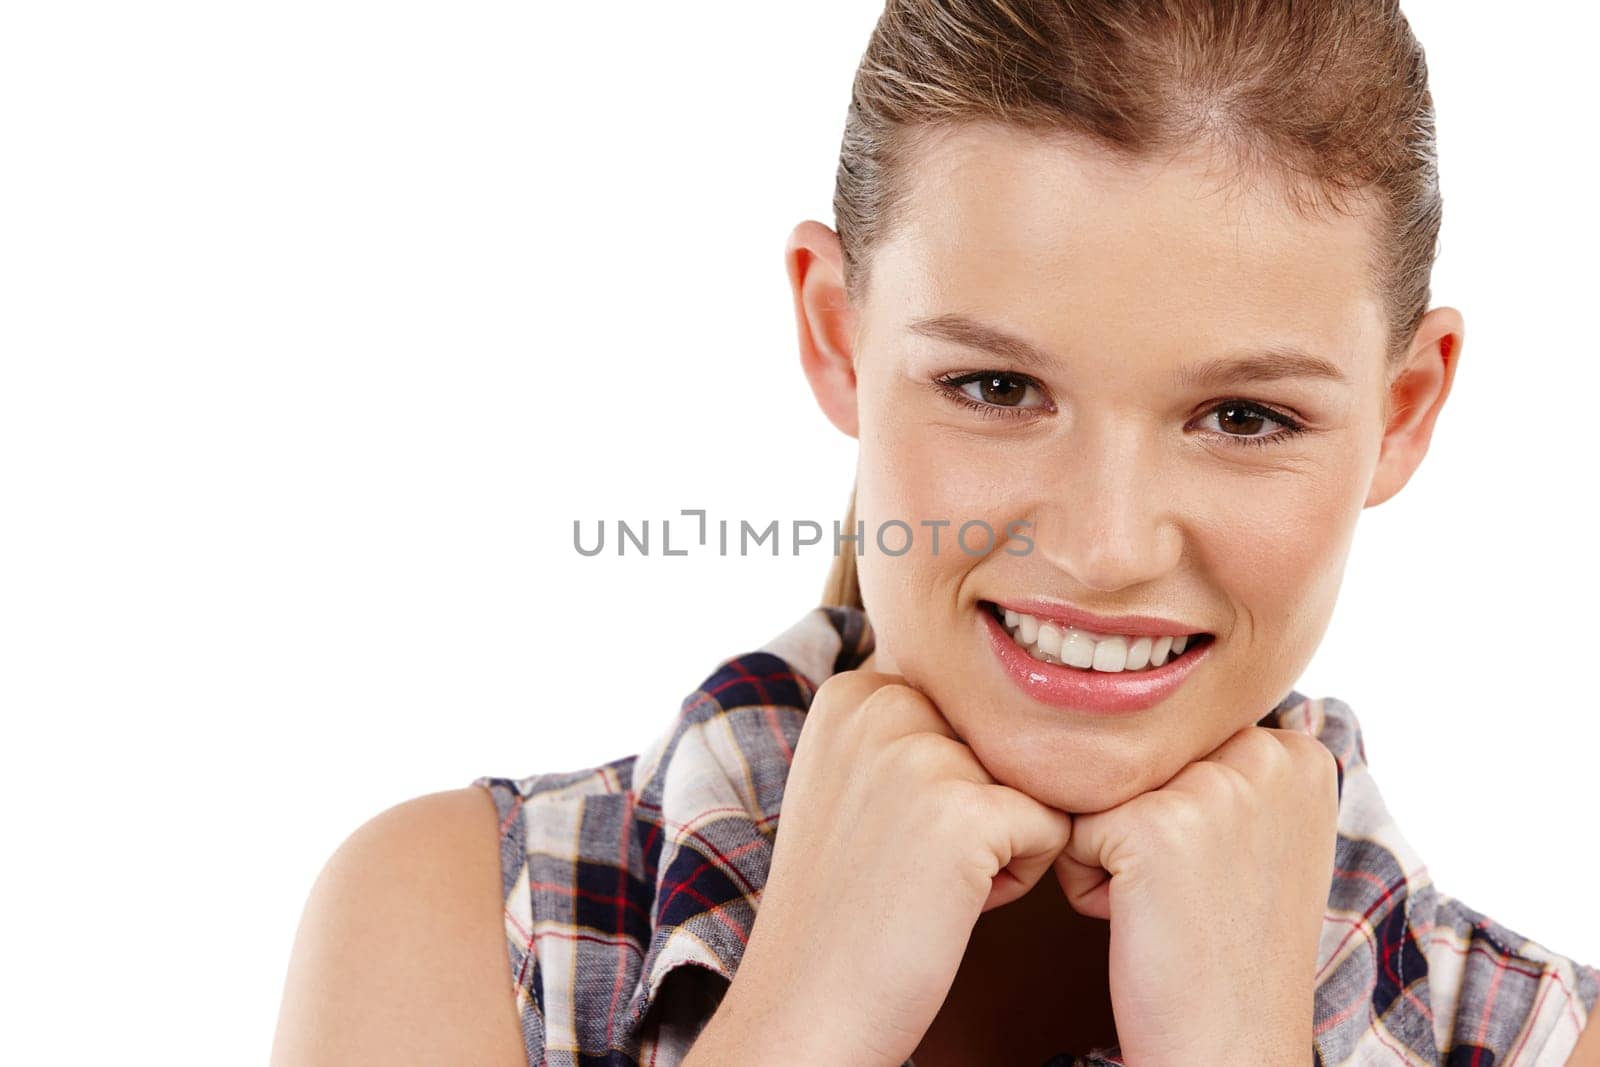 Happy, beauty and portrait of girl in studio for makeup, wellness and natural glowing skin on white background. Smile, face and gen z model with cosmetics, shine and treatment results satisfaction.